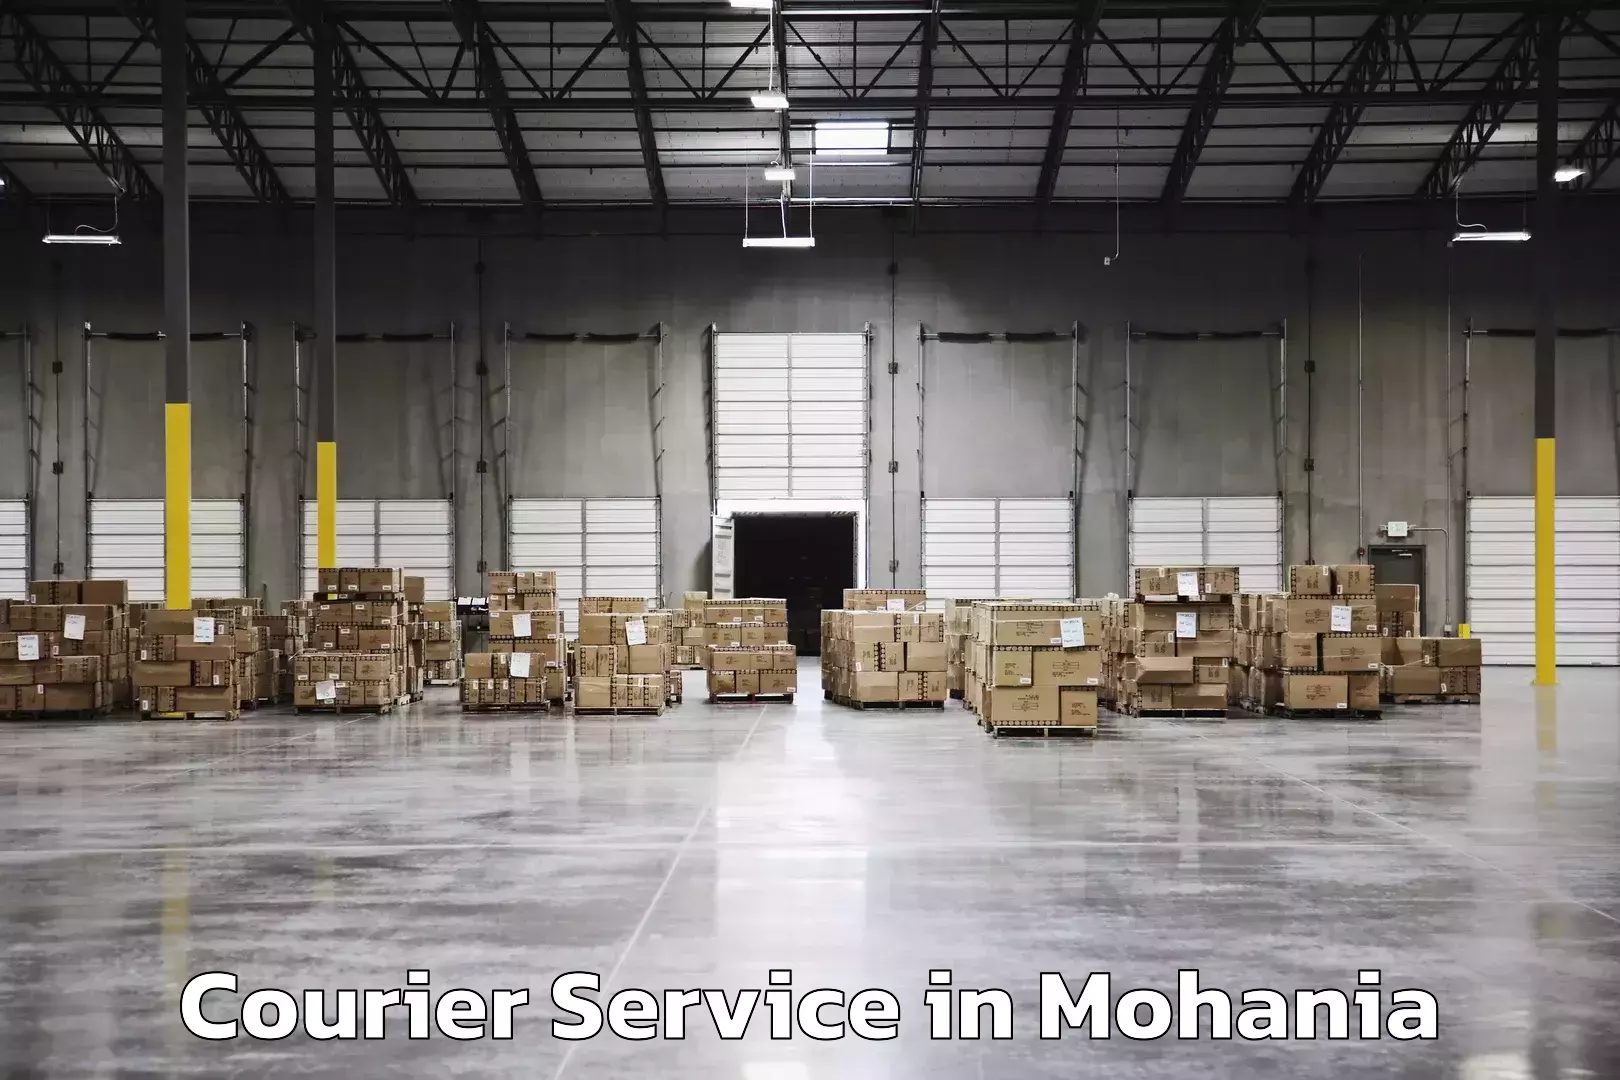 Efficient freight service in Mohania